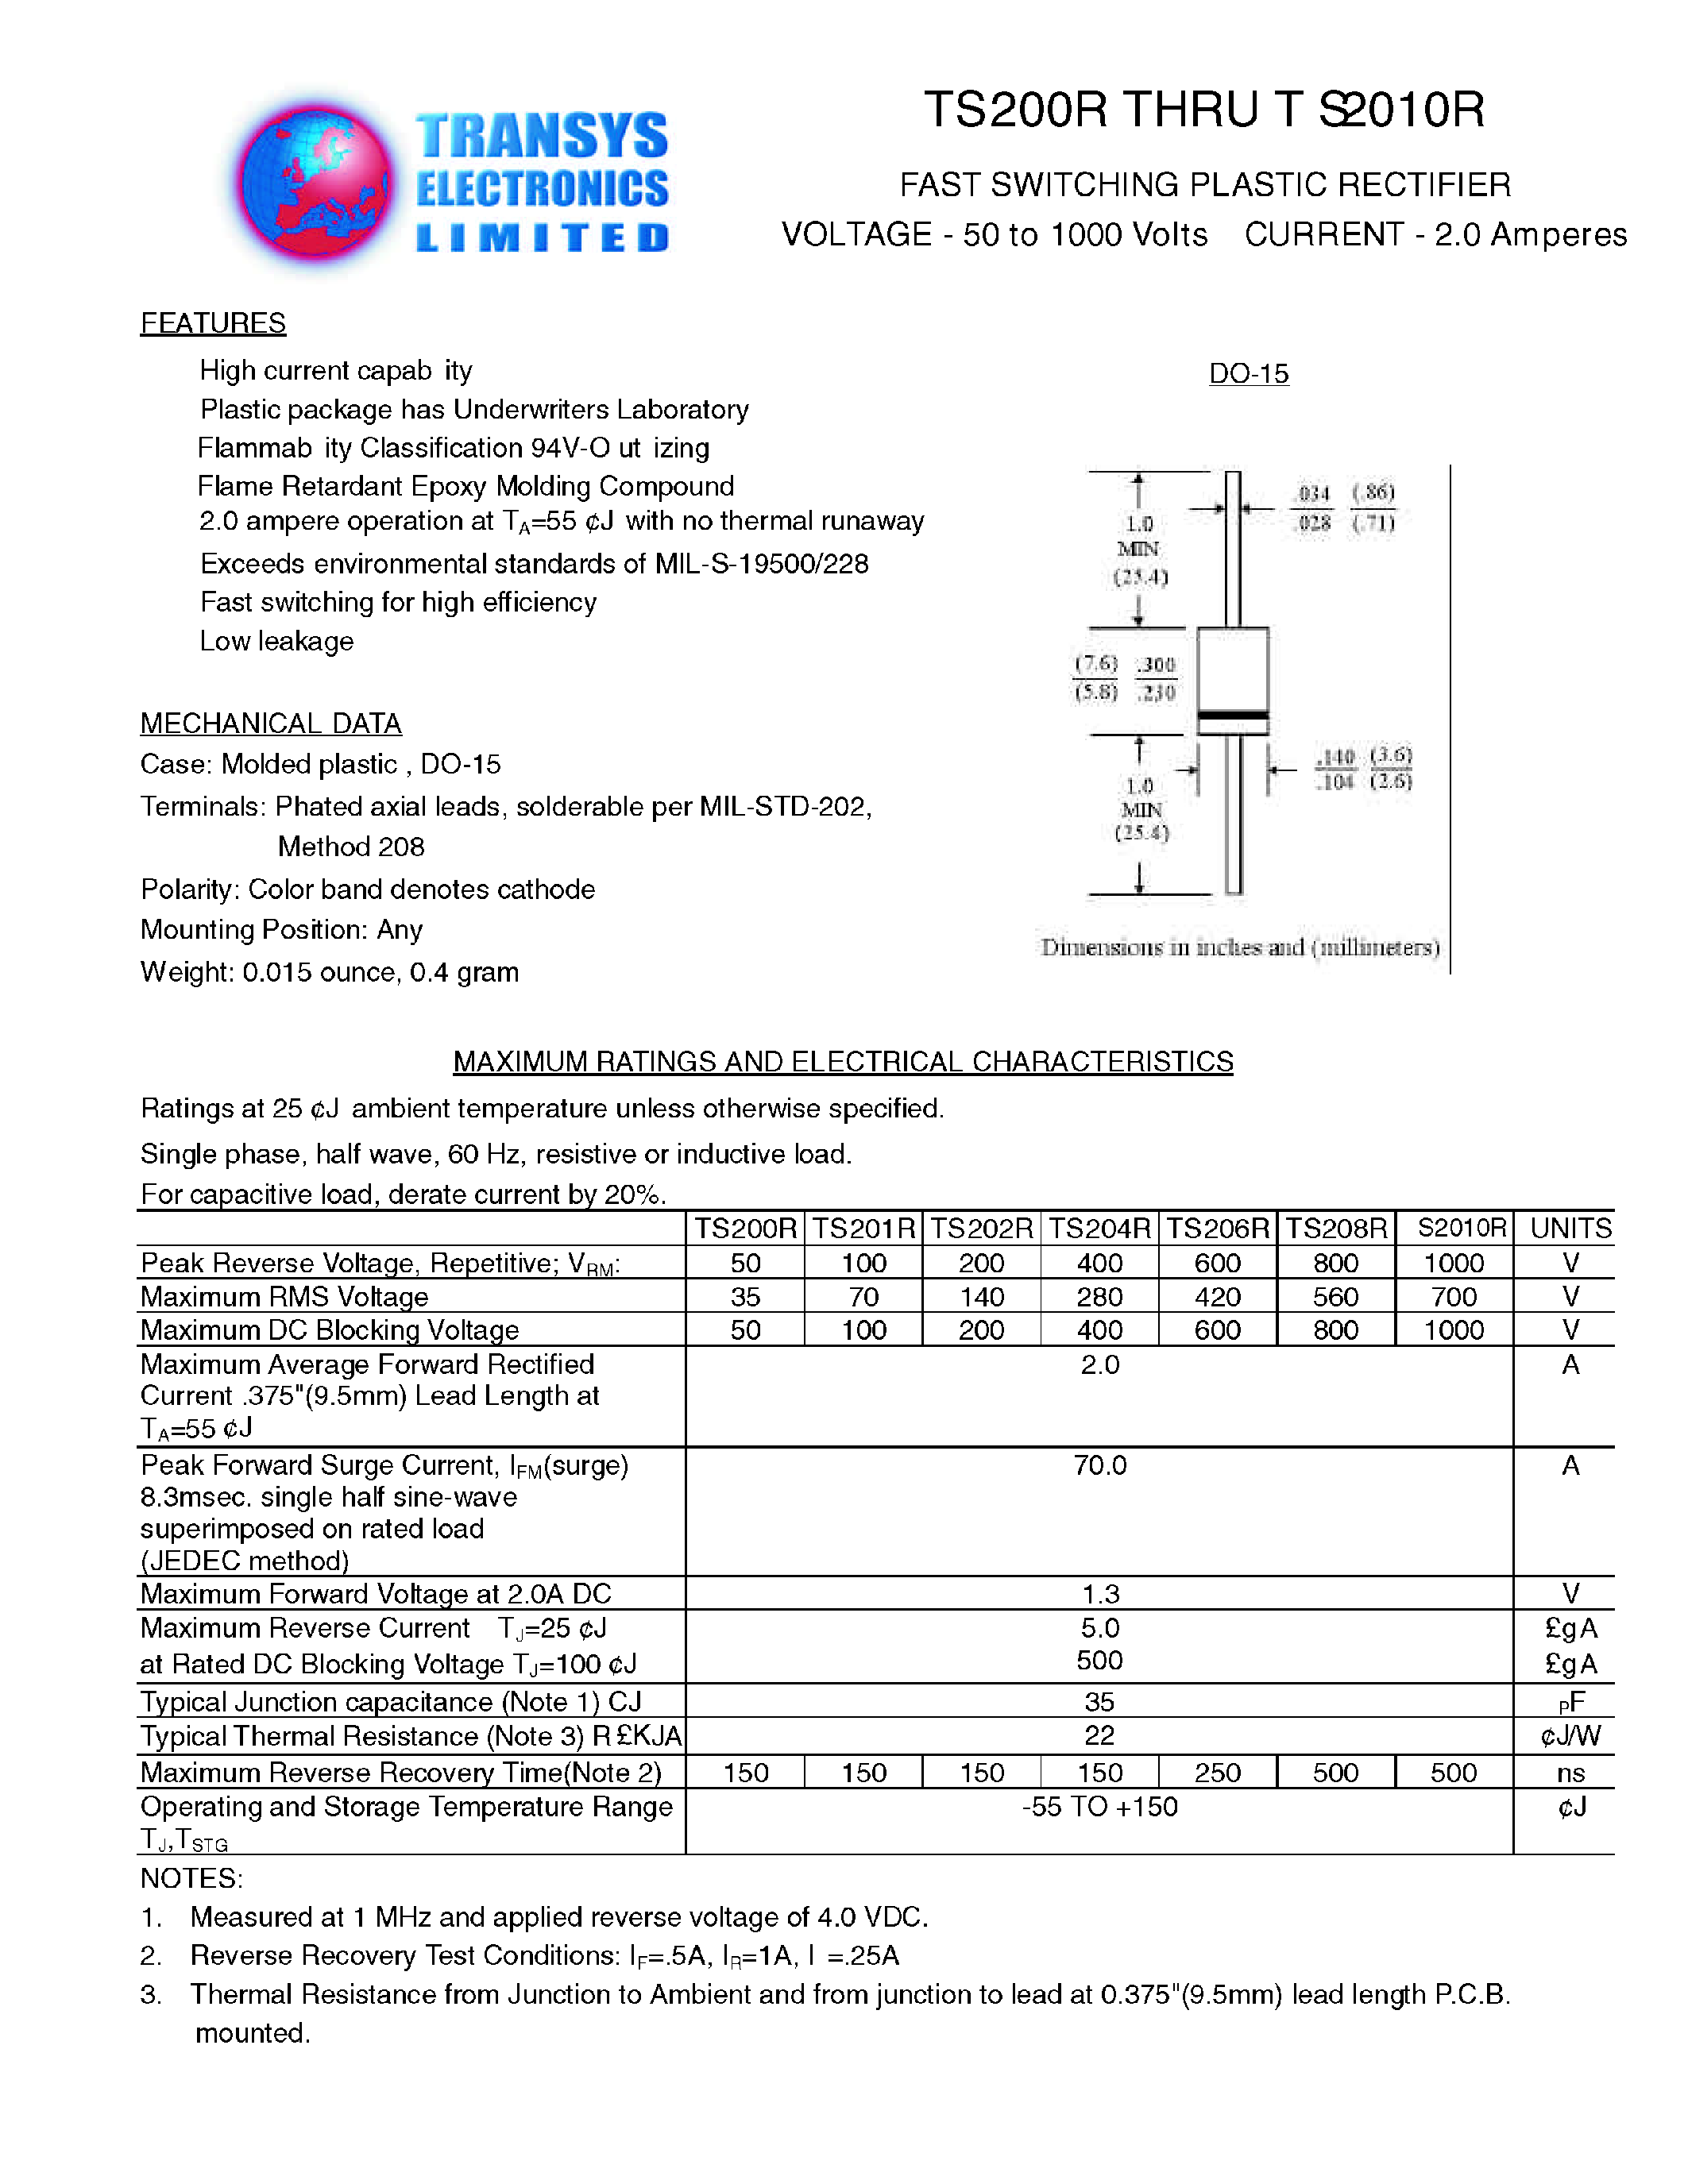 Datasheet TS204R - FAST SWITCHIING RECTIFIER(Reverse Voltage - 50 to 1000 Volts/ Current - 2.0Ampere) page 1